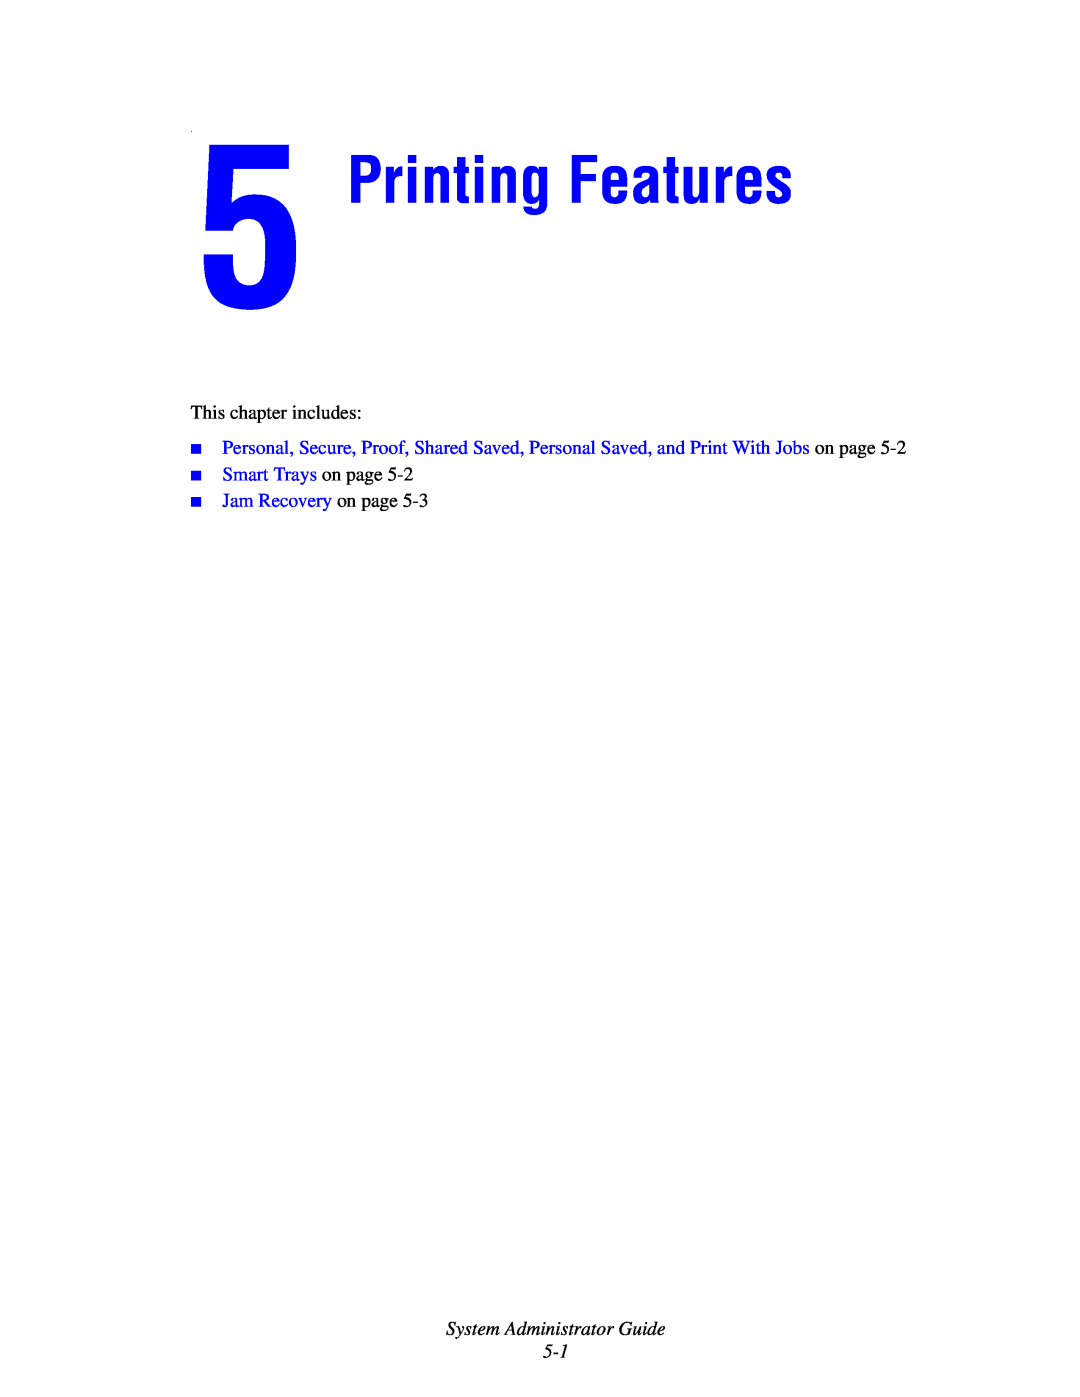 Xerox 1235/DX, 4510, 1235DT Printing Features, Smart Trays on page Jam Recovery on page, System Administrator Guide 5-1 